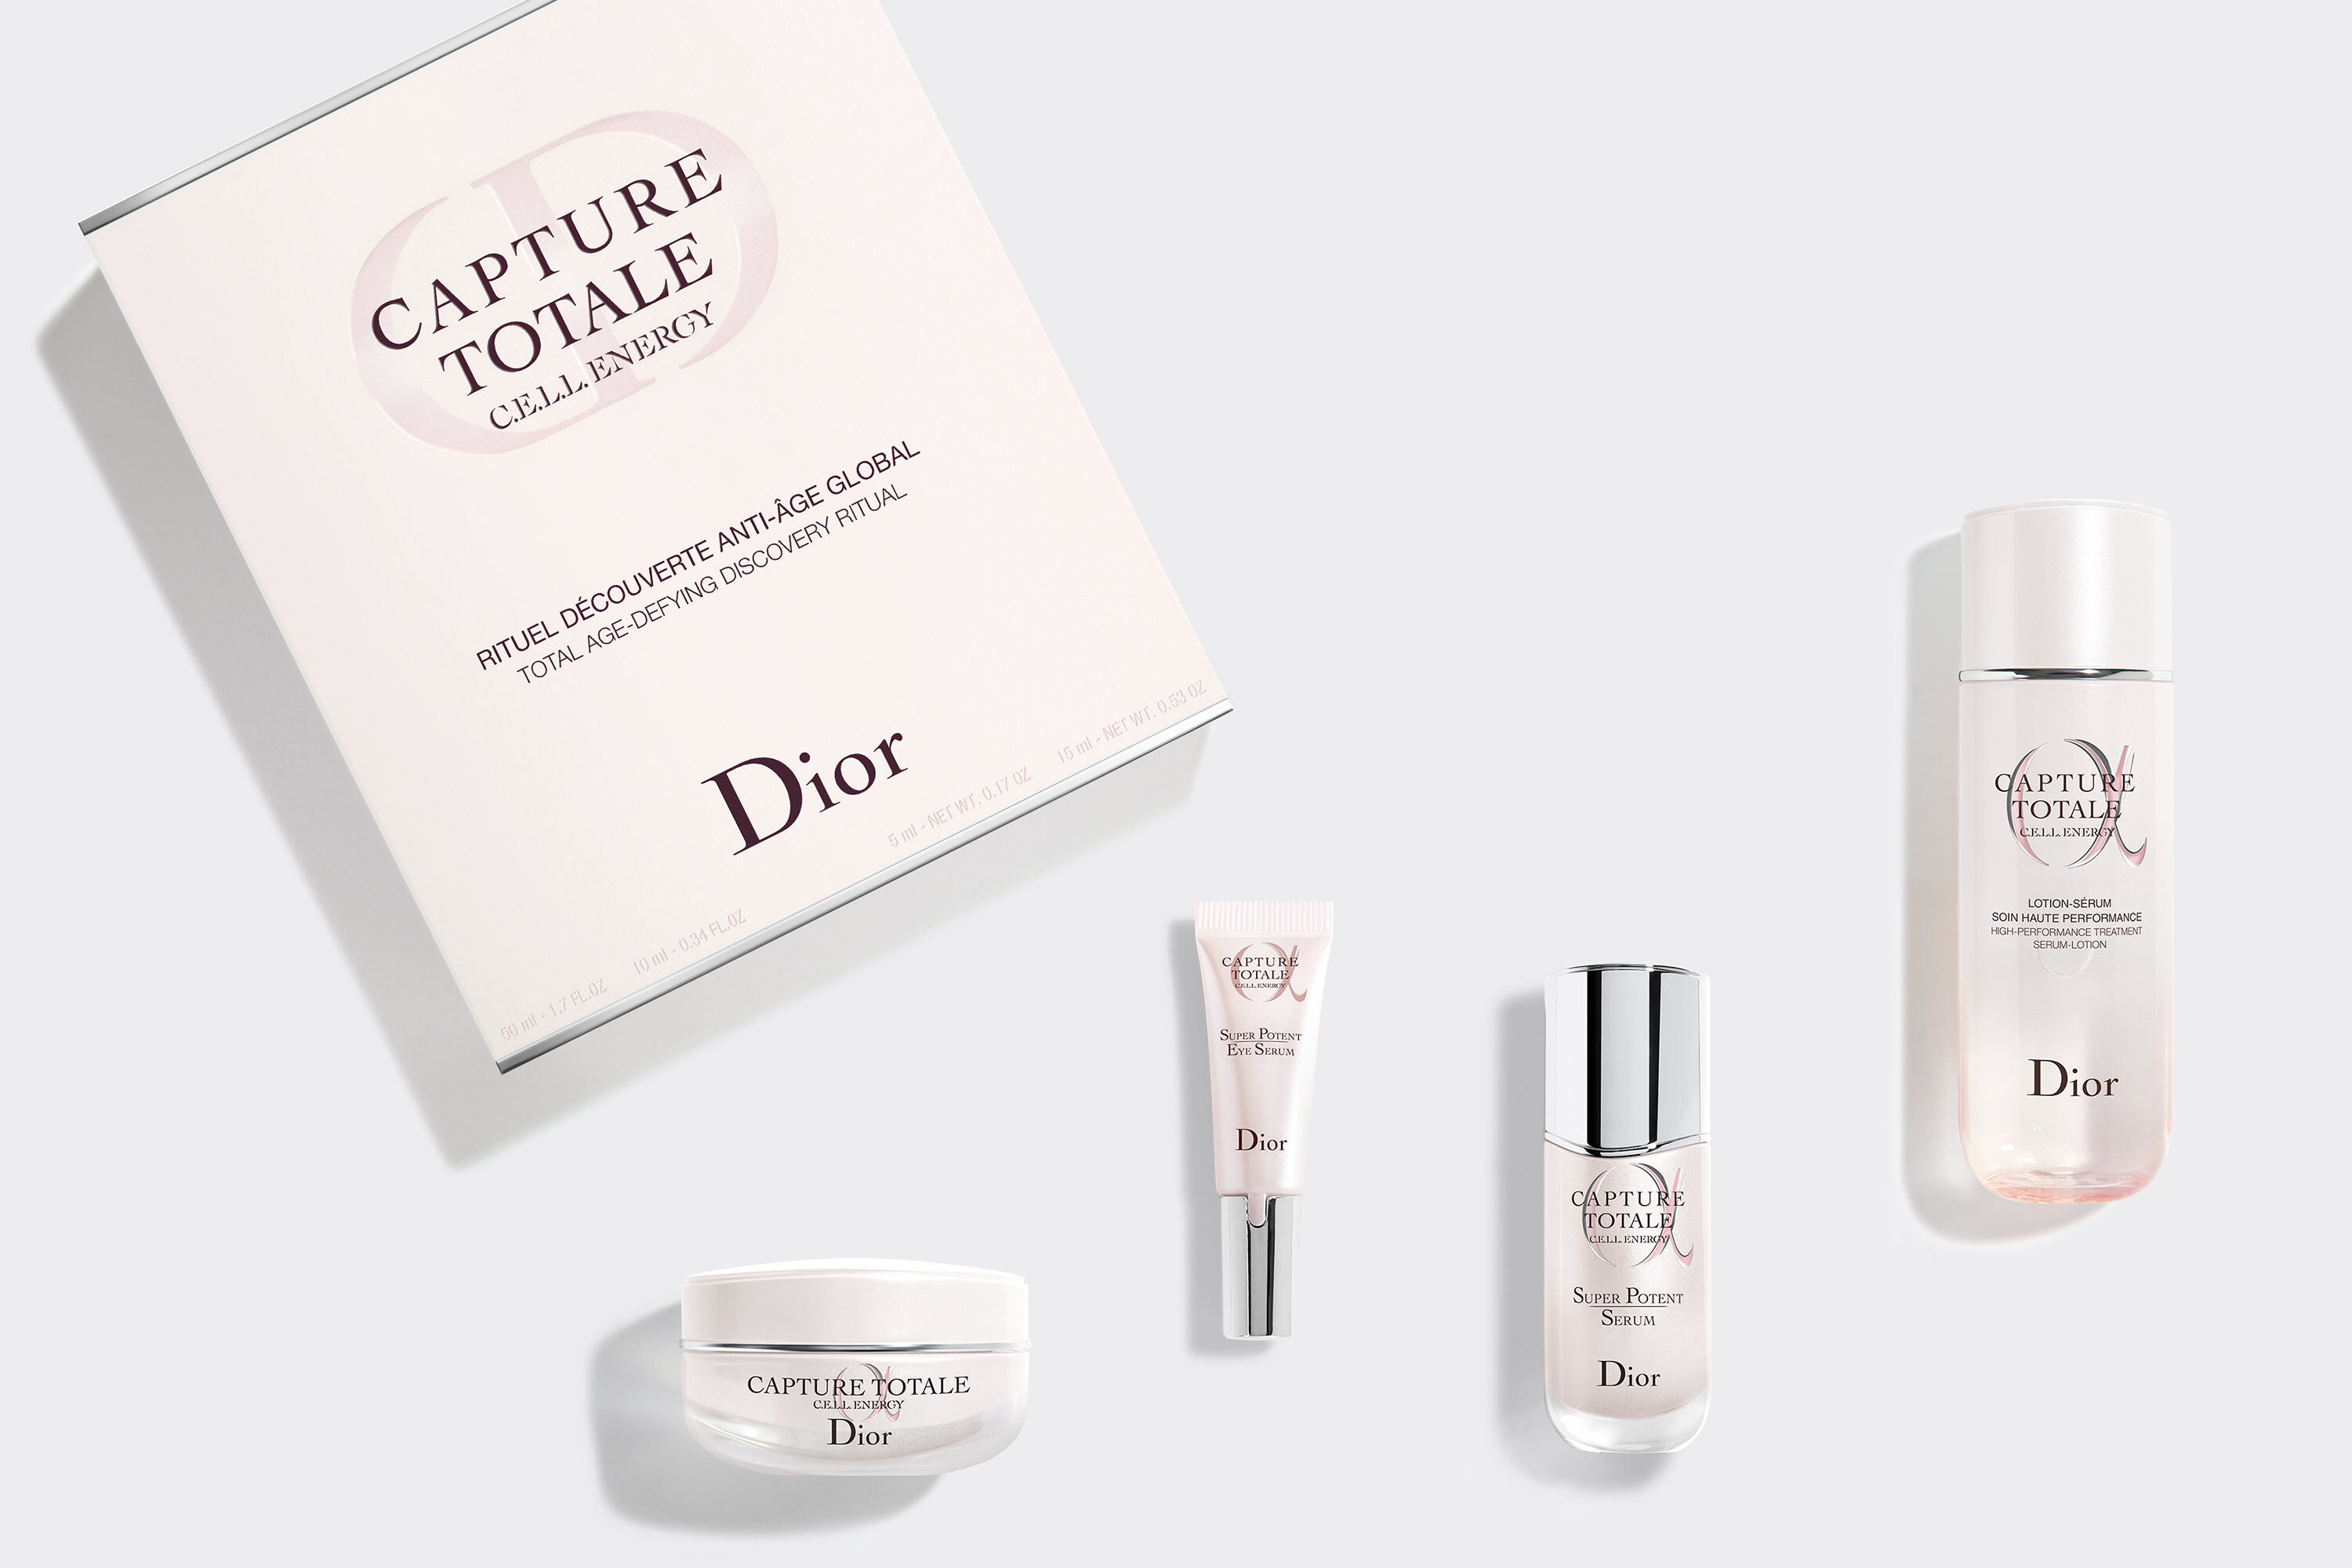 Capture Totale Discovery Ritual 4 AgeDefying Skincare ProductsDIOR  DIOR